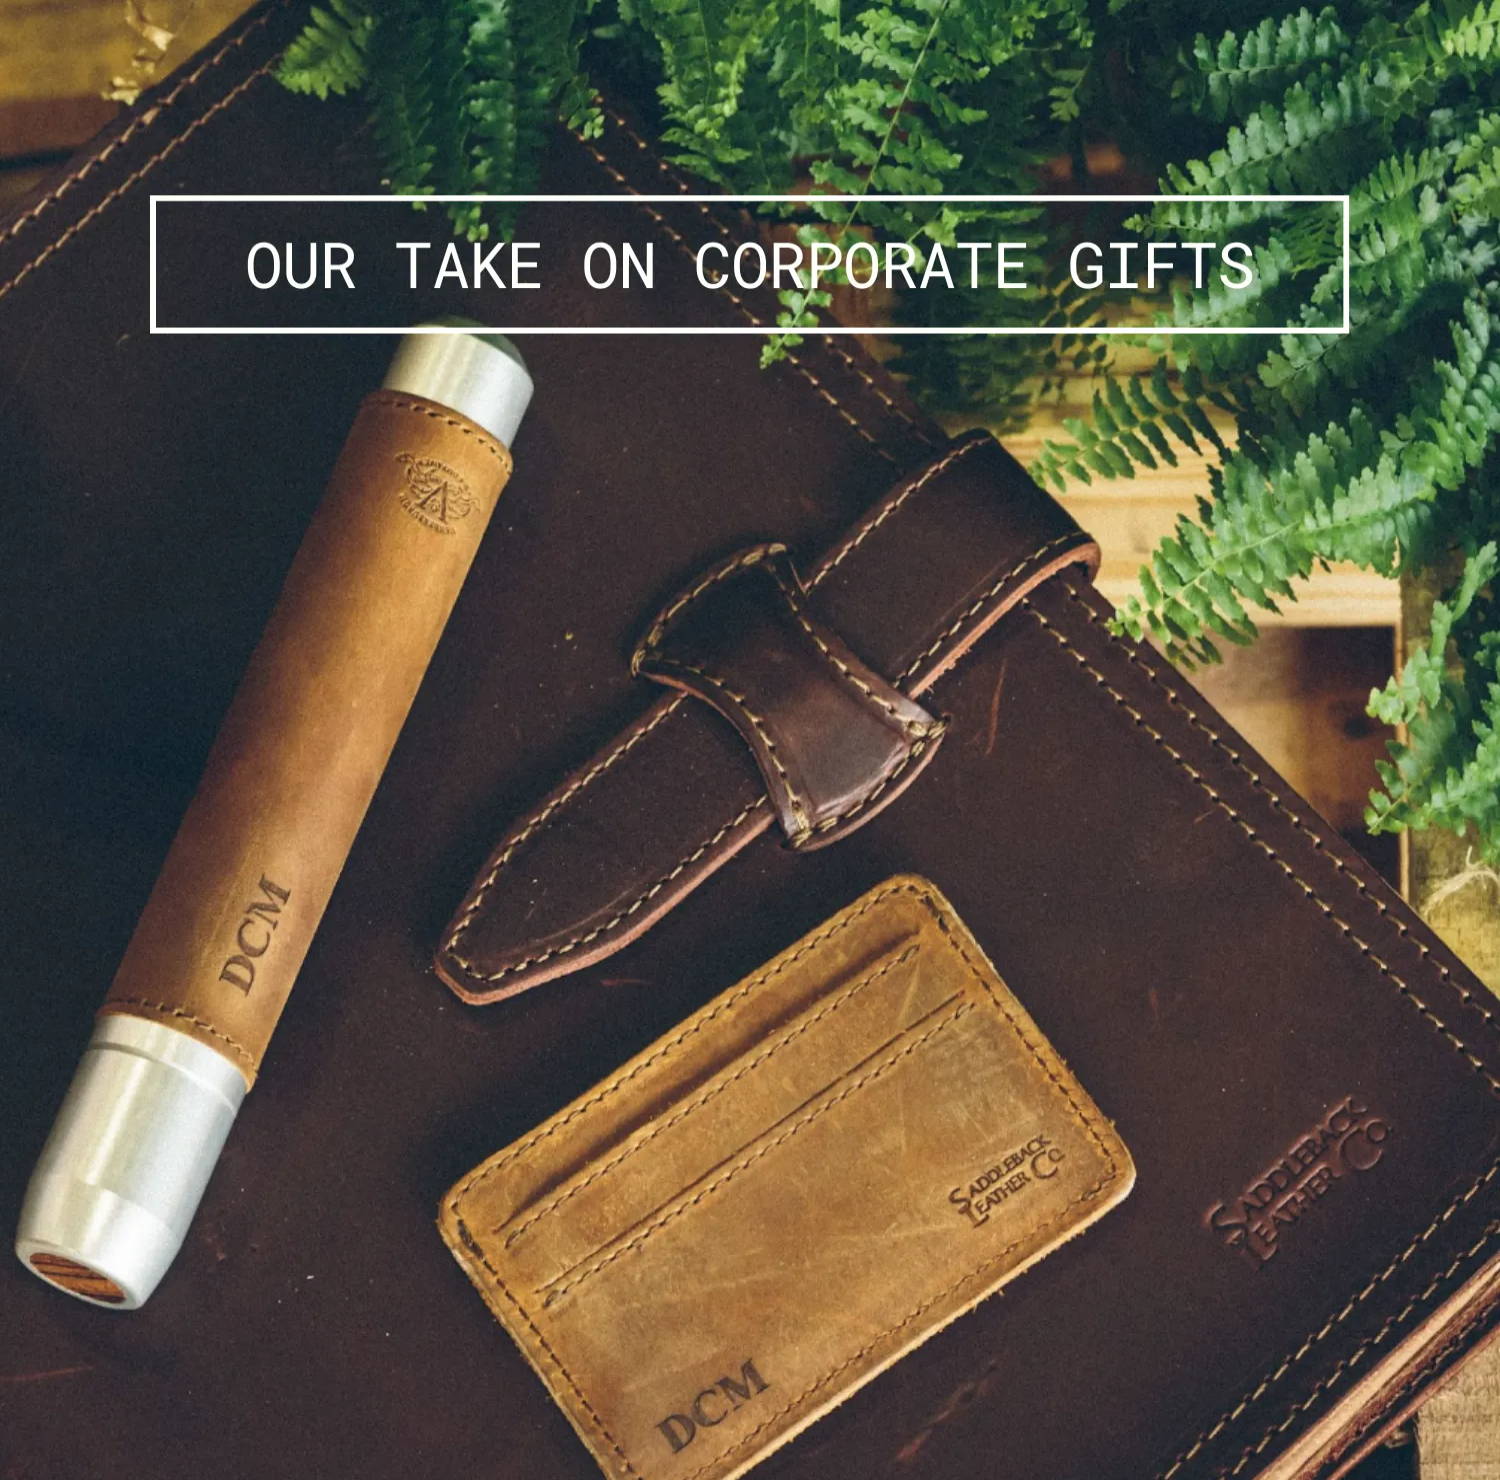 Leather Corporate Gifts for Women to Make an Impact